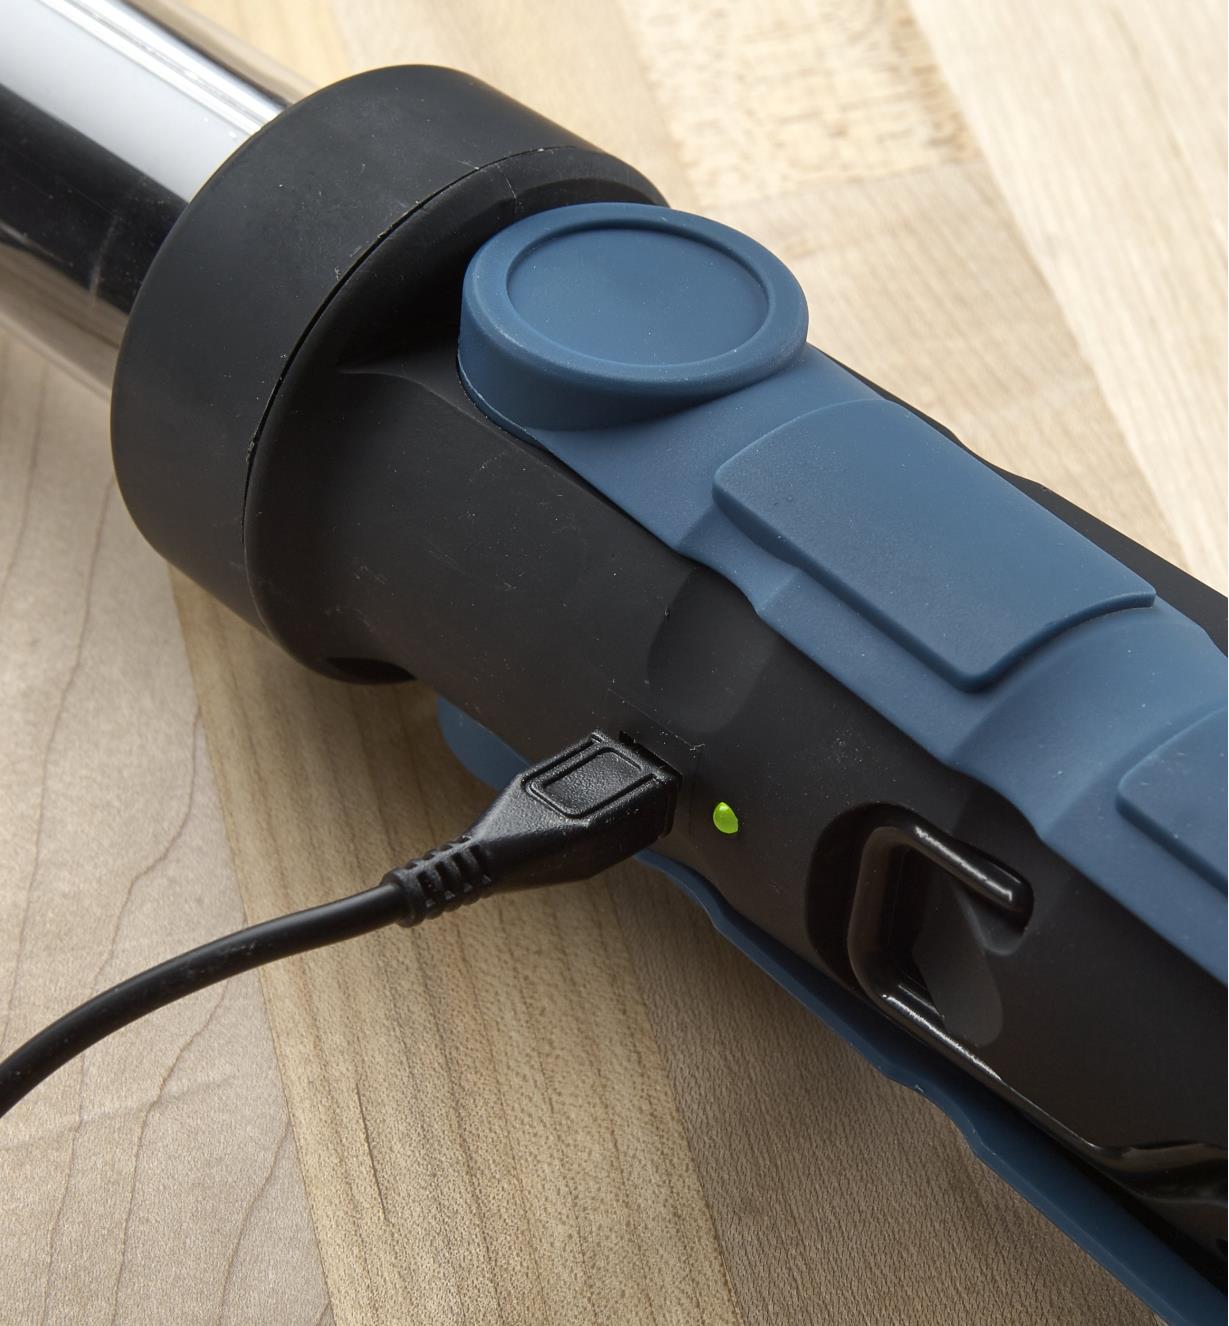 A close-up view of the USB cable plugged into an LED tube light to recharge it